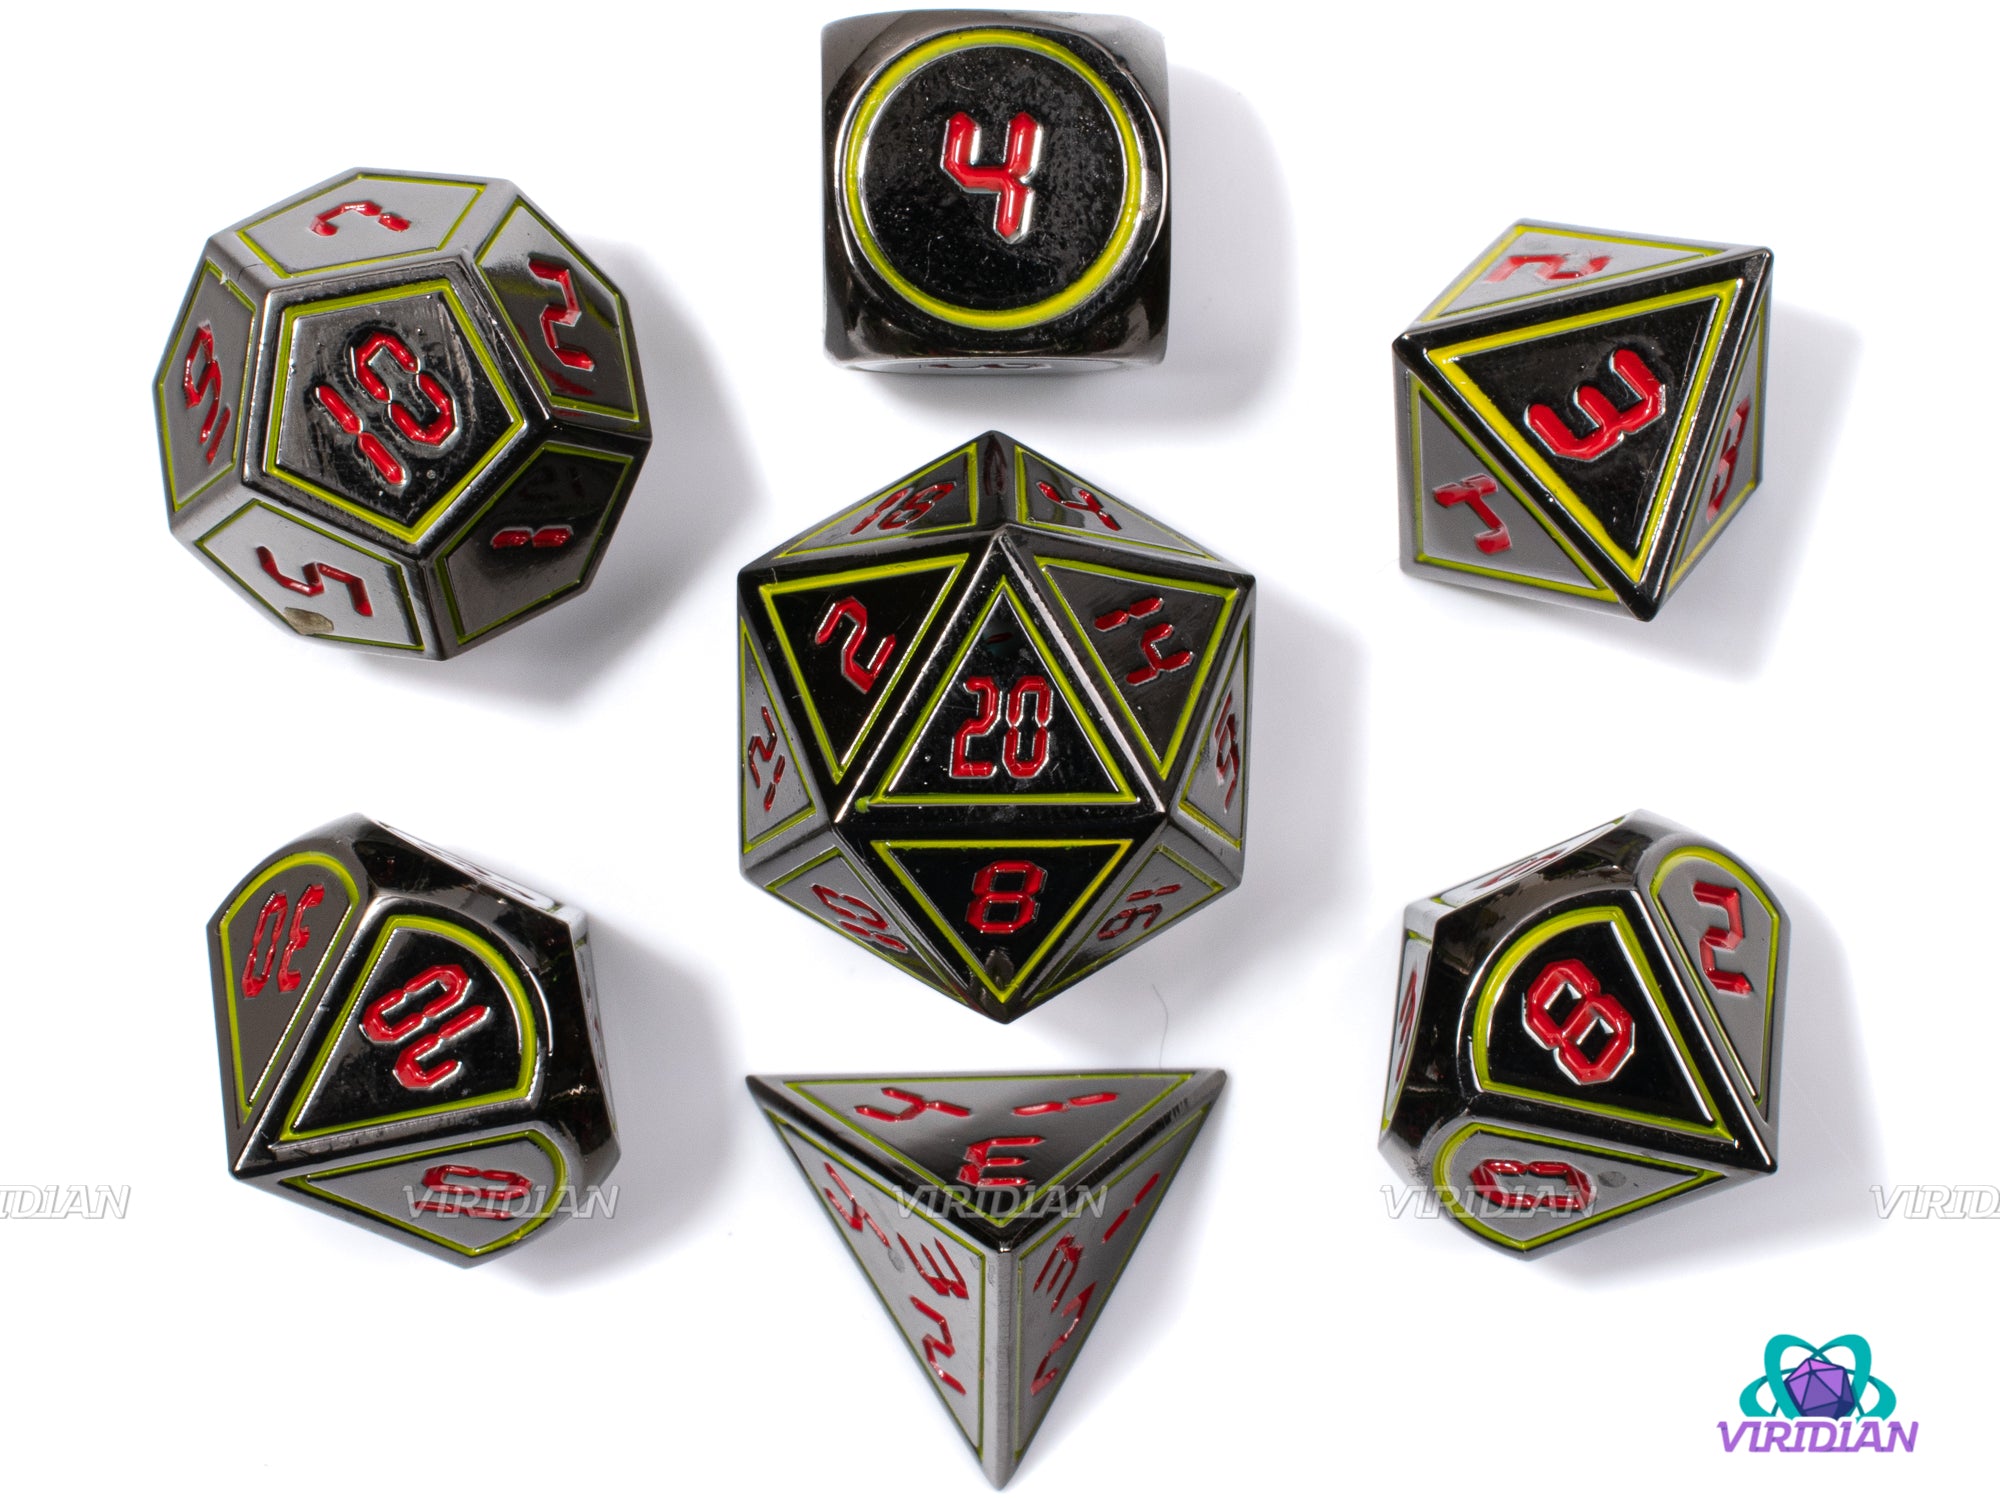 Meltdown | Dark Gray Silver, Yellow Accent, Red Digital Numbered Metal Dice Set (7)